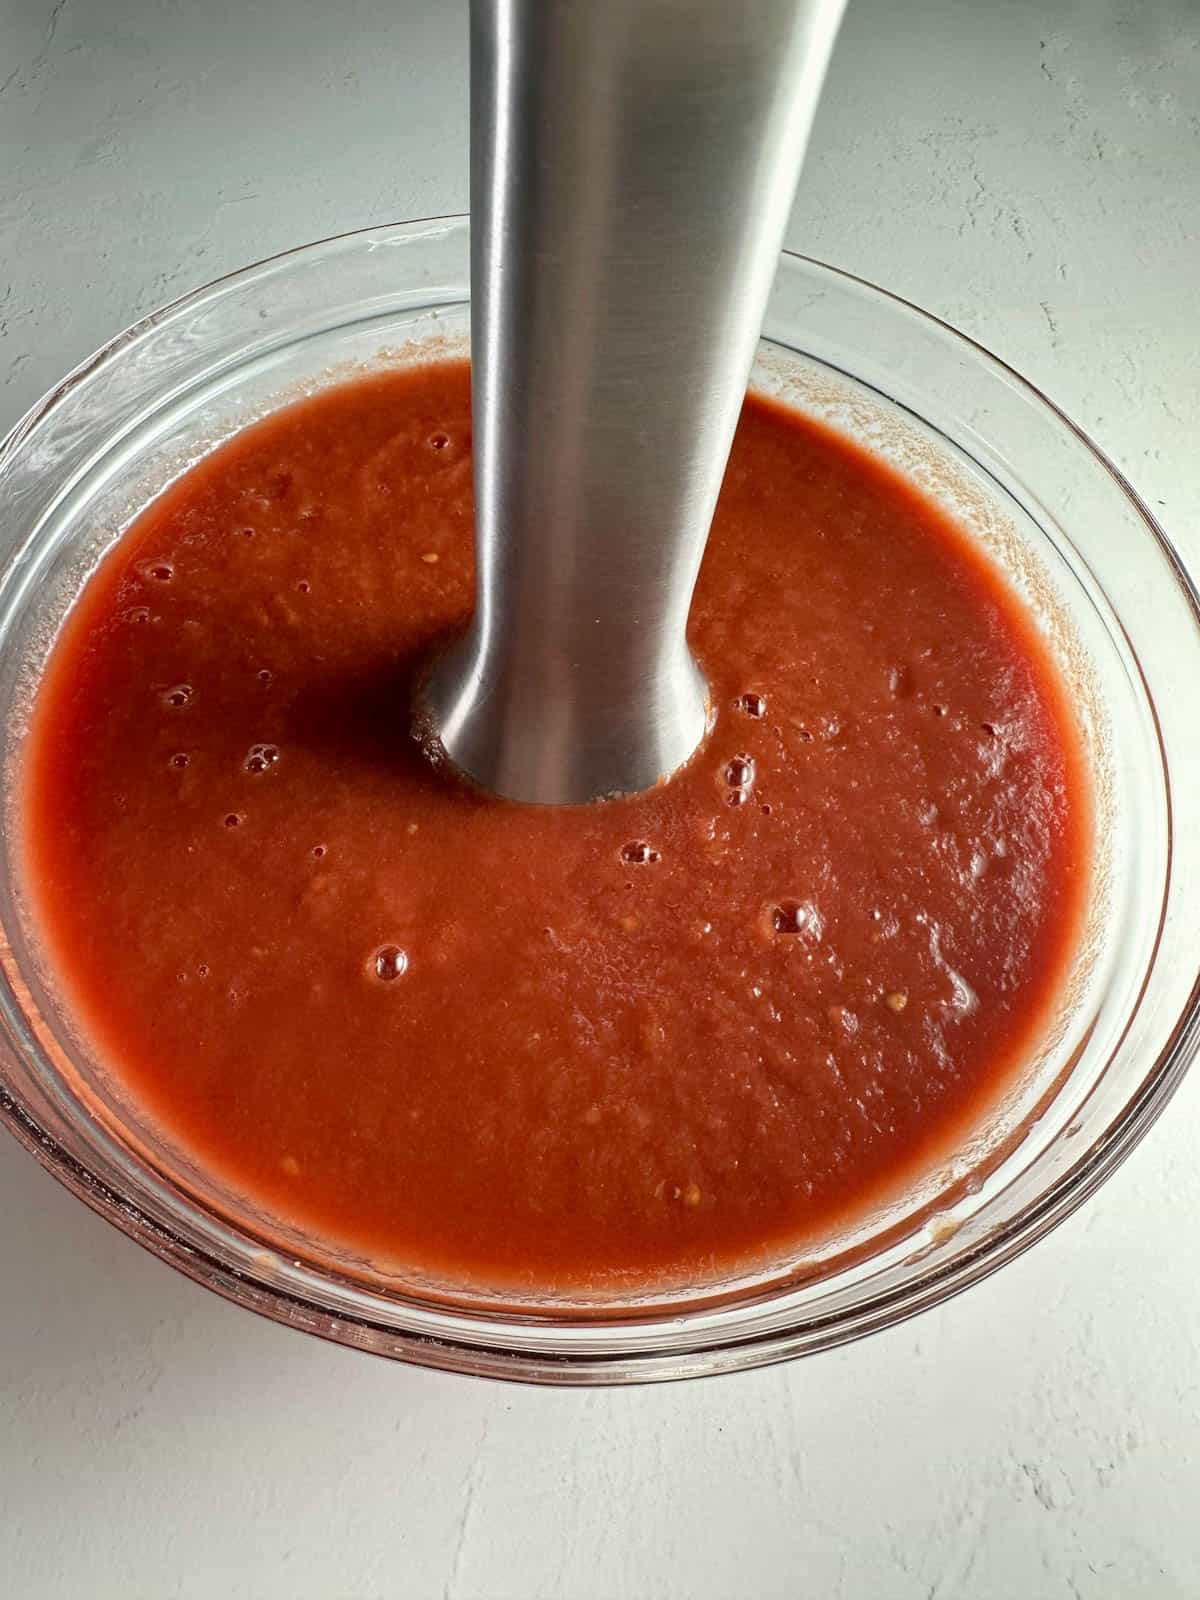 Using an immersion blender to puree tomatoes.